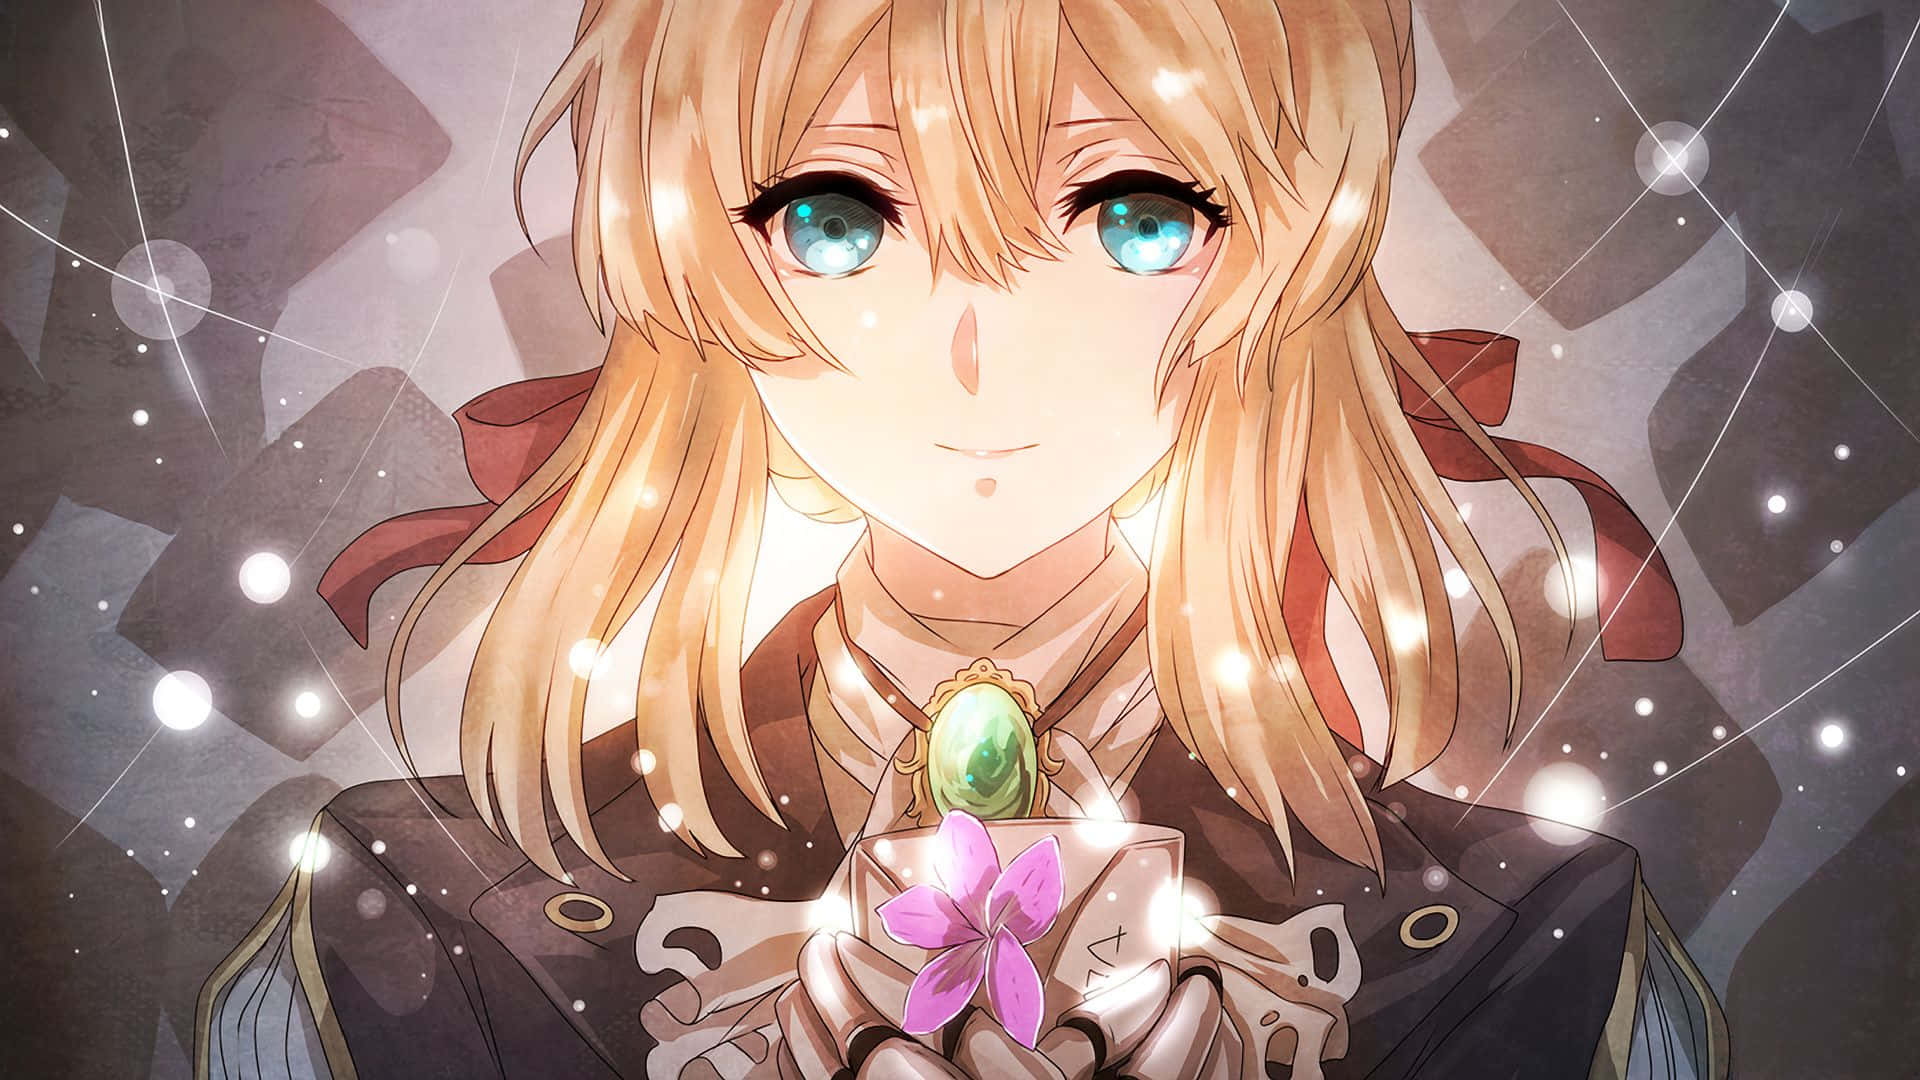 "The Little Auto Memory Doll - Violet Evergarden"